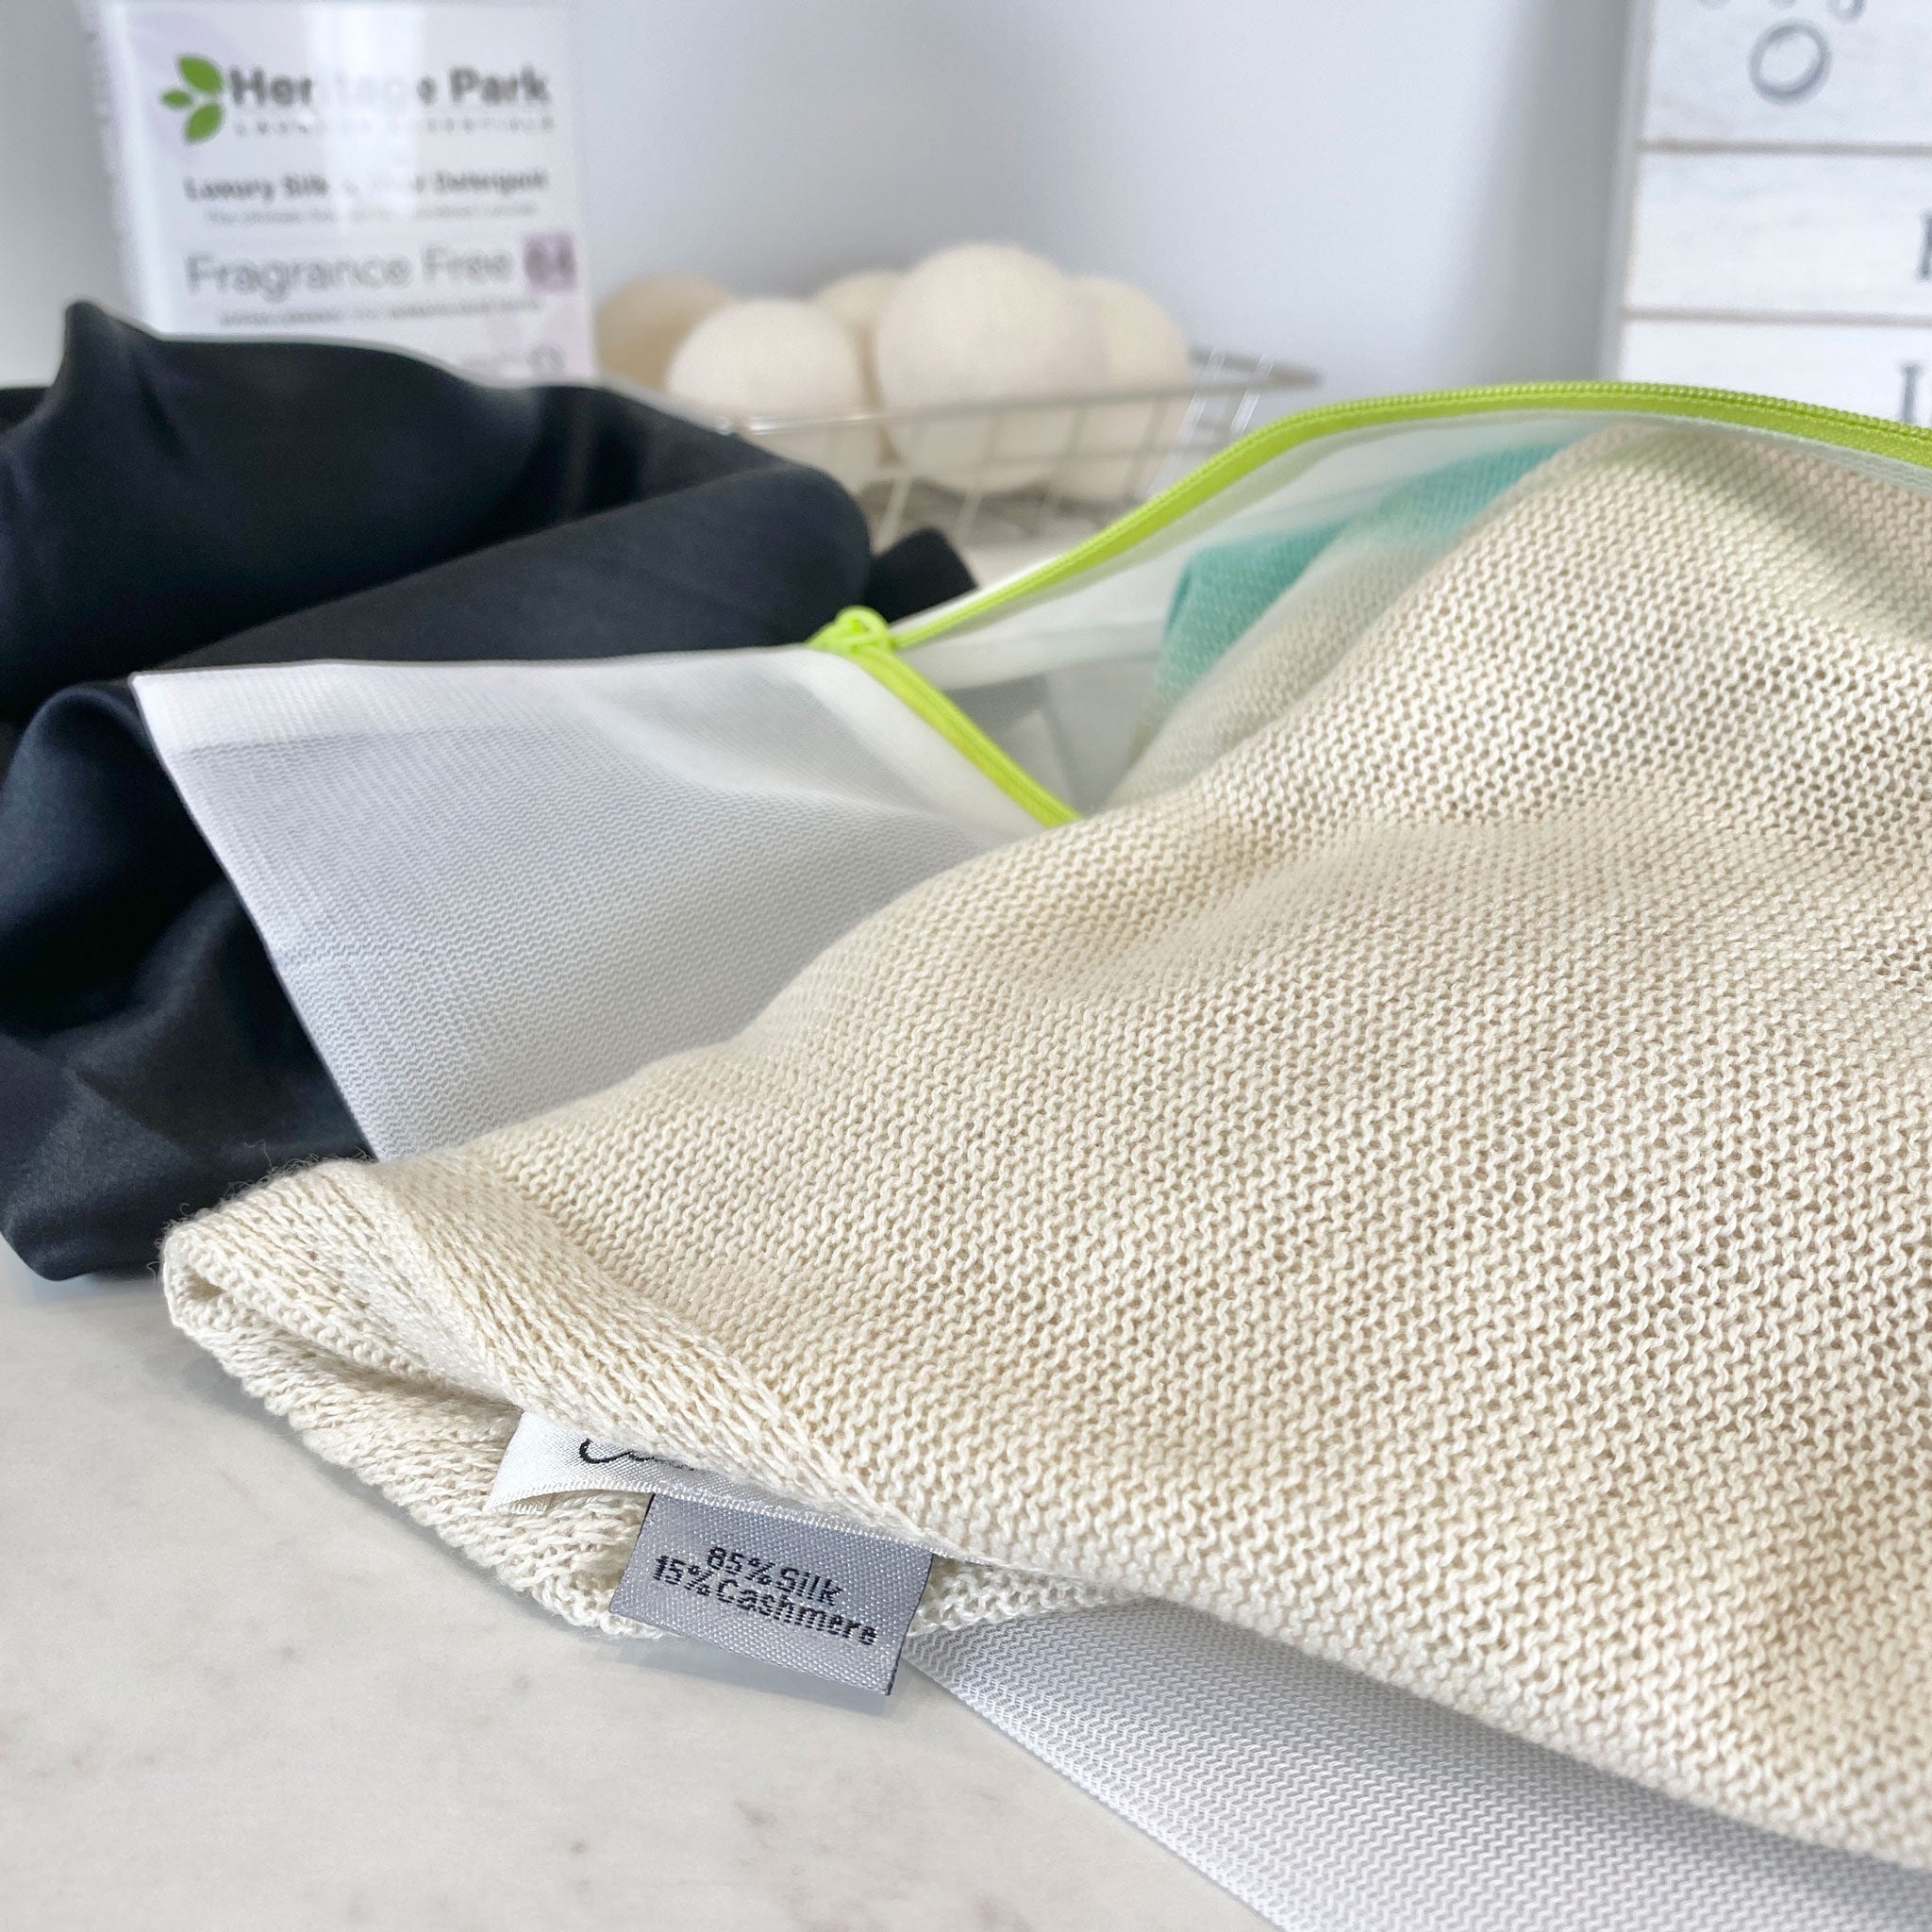 https://cdn.shopify.com/s/files/1/1035/1721/files/How-to-Wash-Wool-and-Cashmere.jpg?v=1637335921